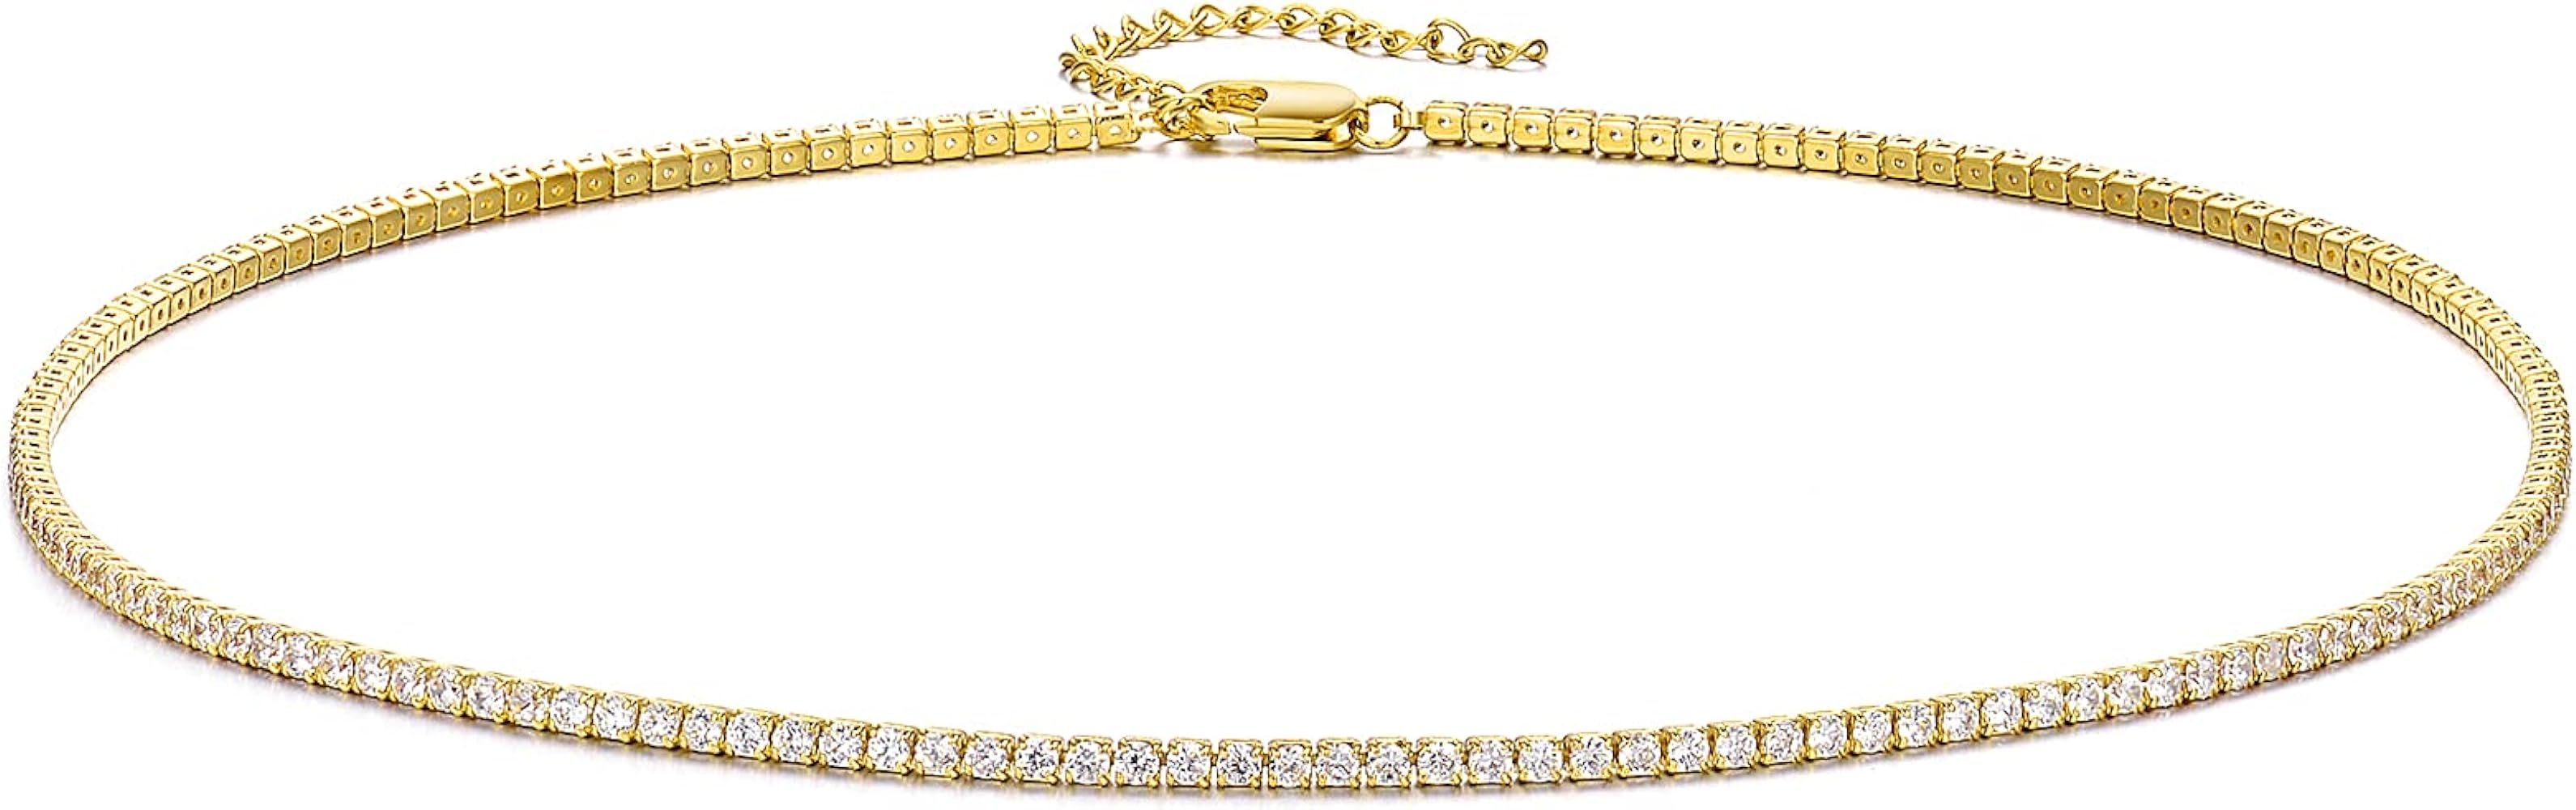 18K Gold/Silver Plated Cubic Zirconia Tennis Necklace Dainty Classic Magnificent Round Tennis Chain  | Amazon (US)